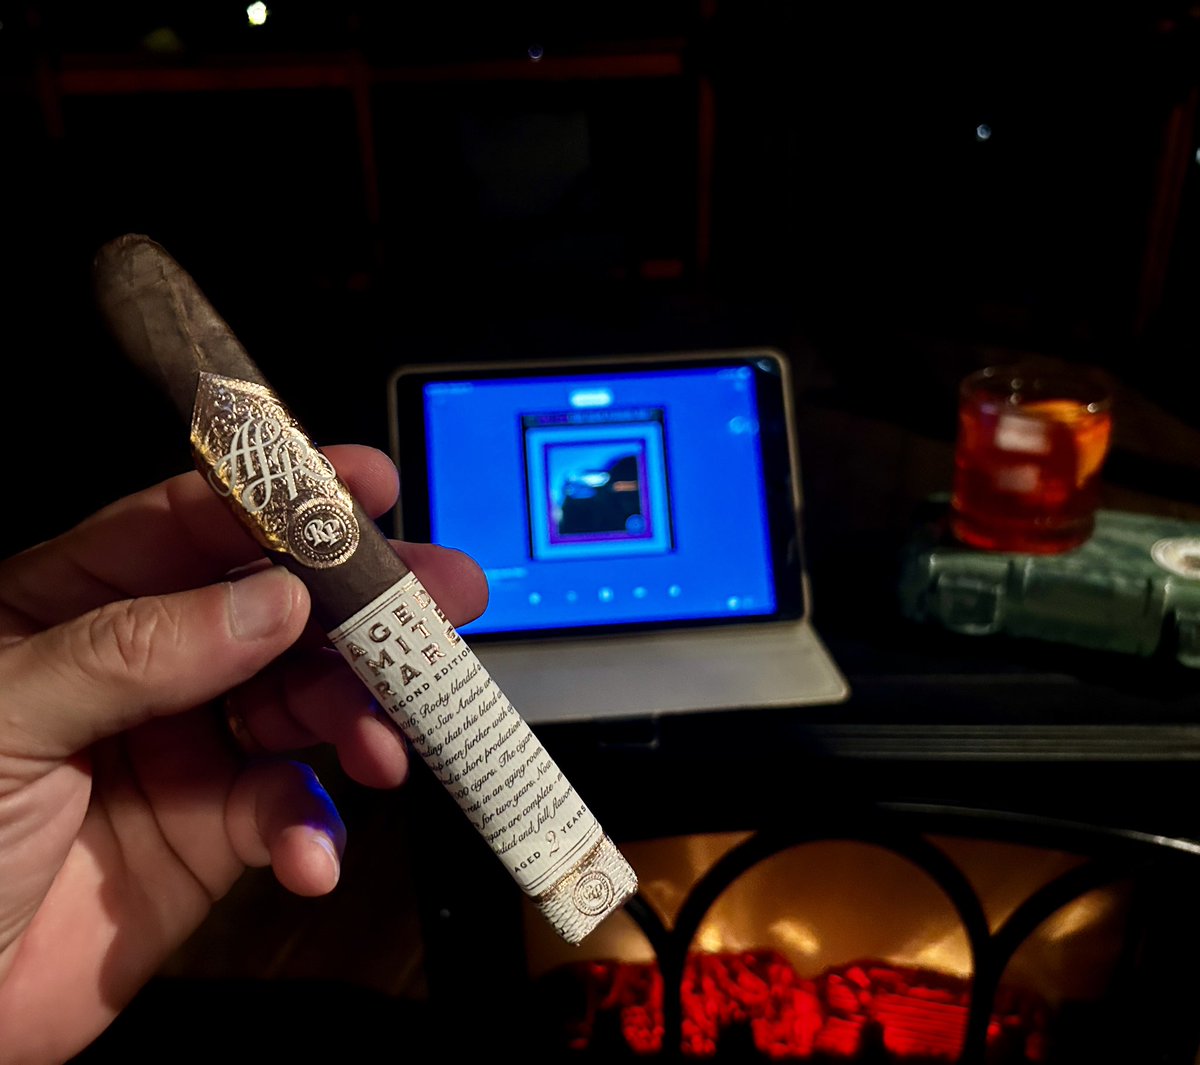 Going with nice @RockyPatelCigar Aged Limited Rare box pressed cigar accompanied by Angel Envy Eny with fresh squeezed orange and splash of cranberry. Taking music recommendations tonight. What ya got? Any genera.